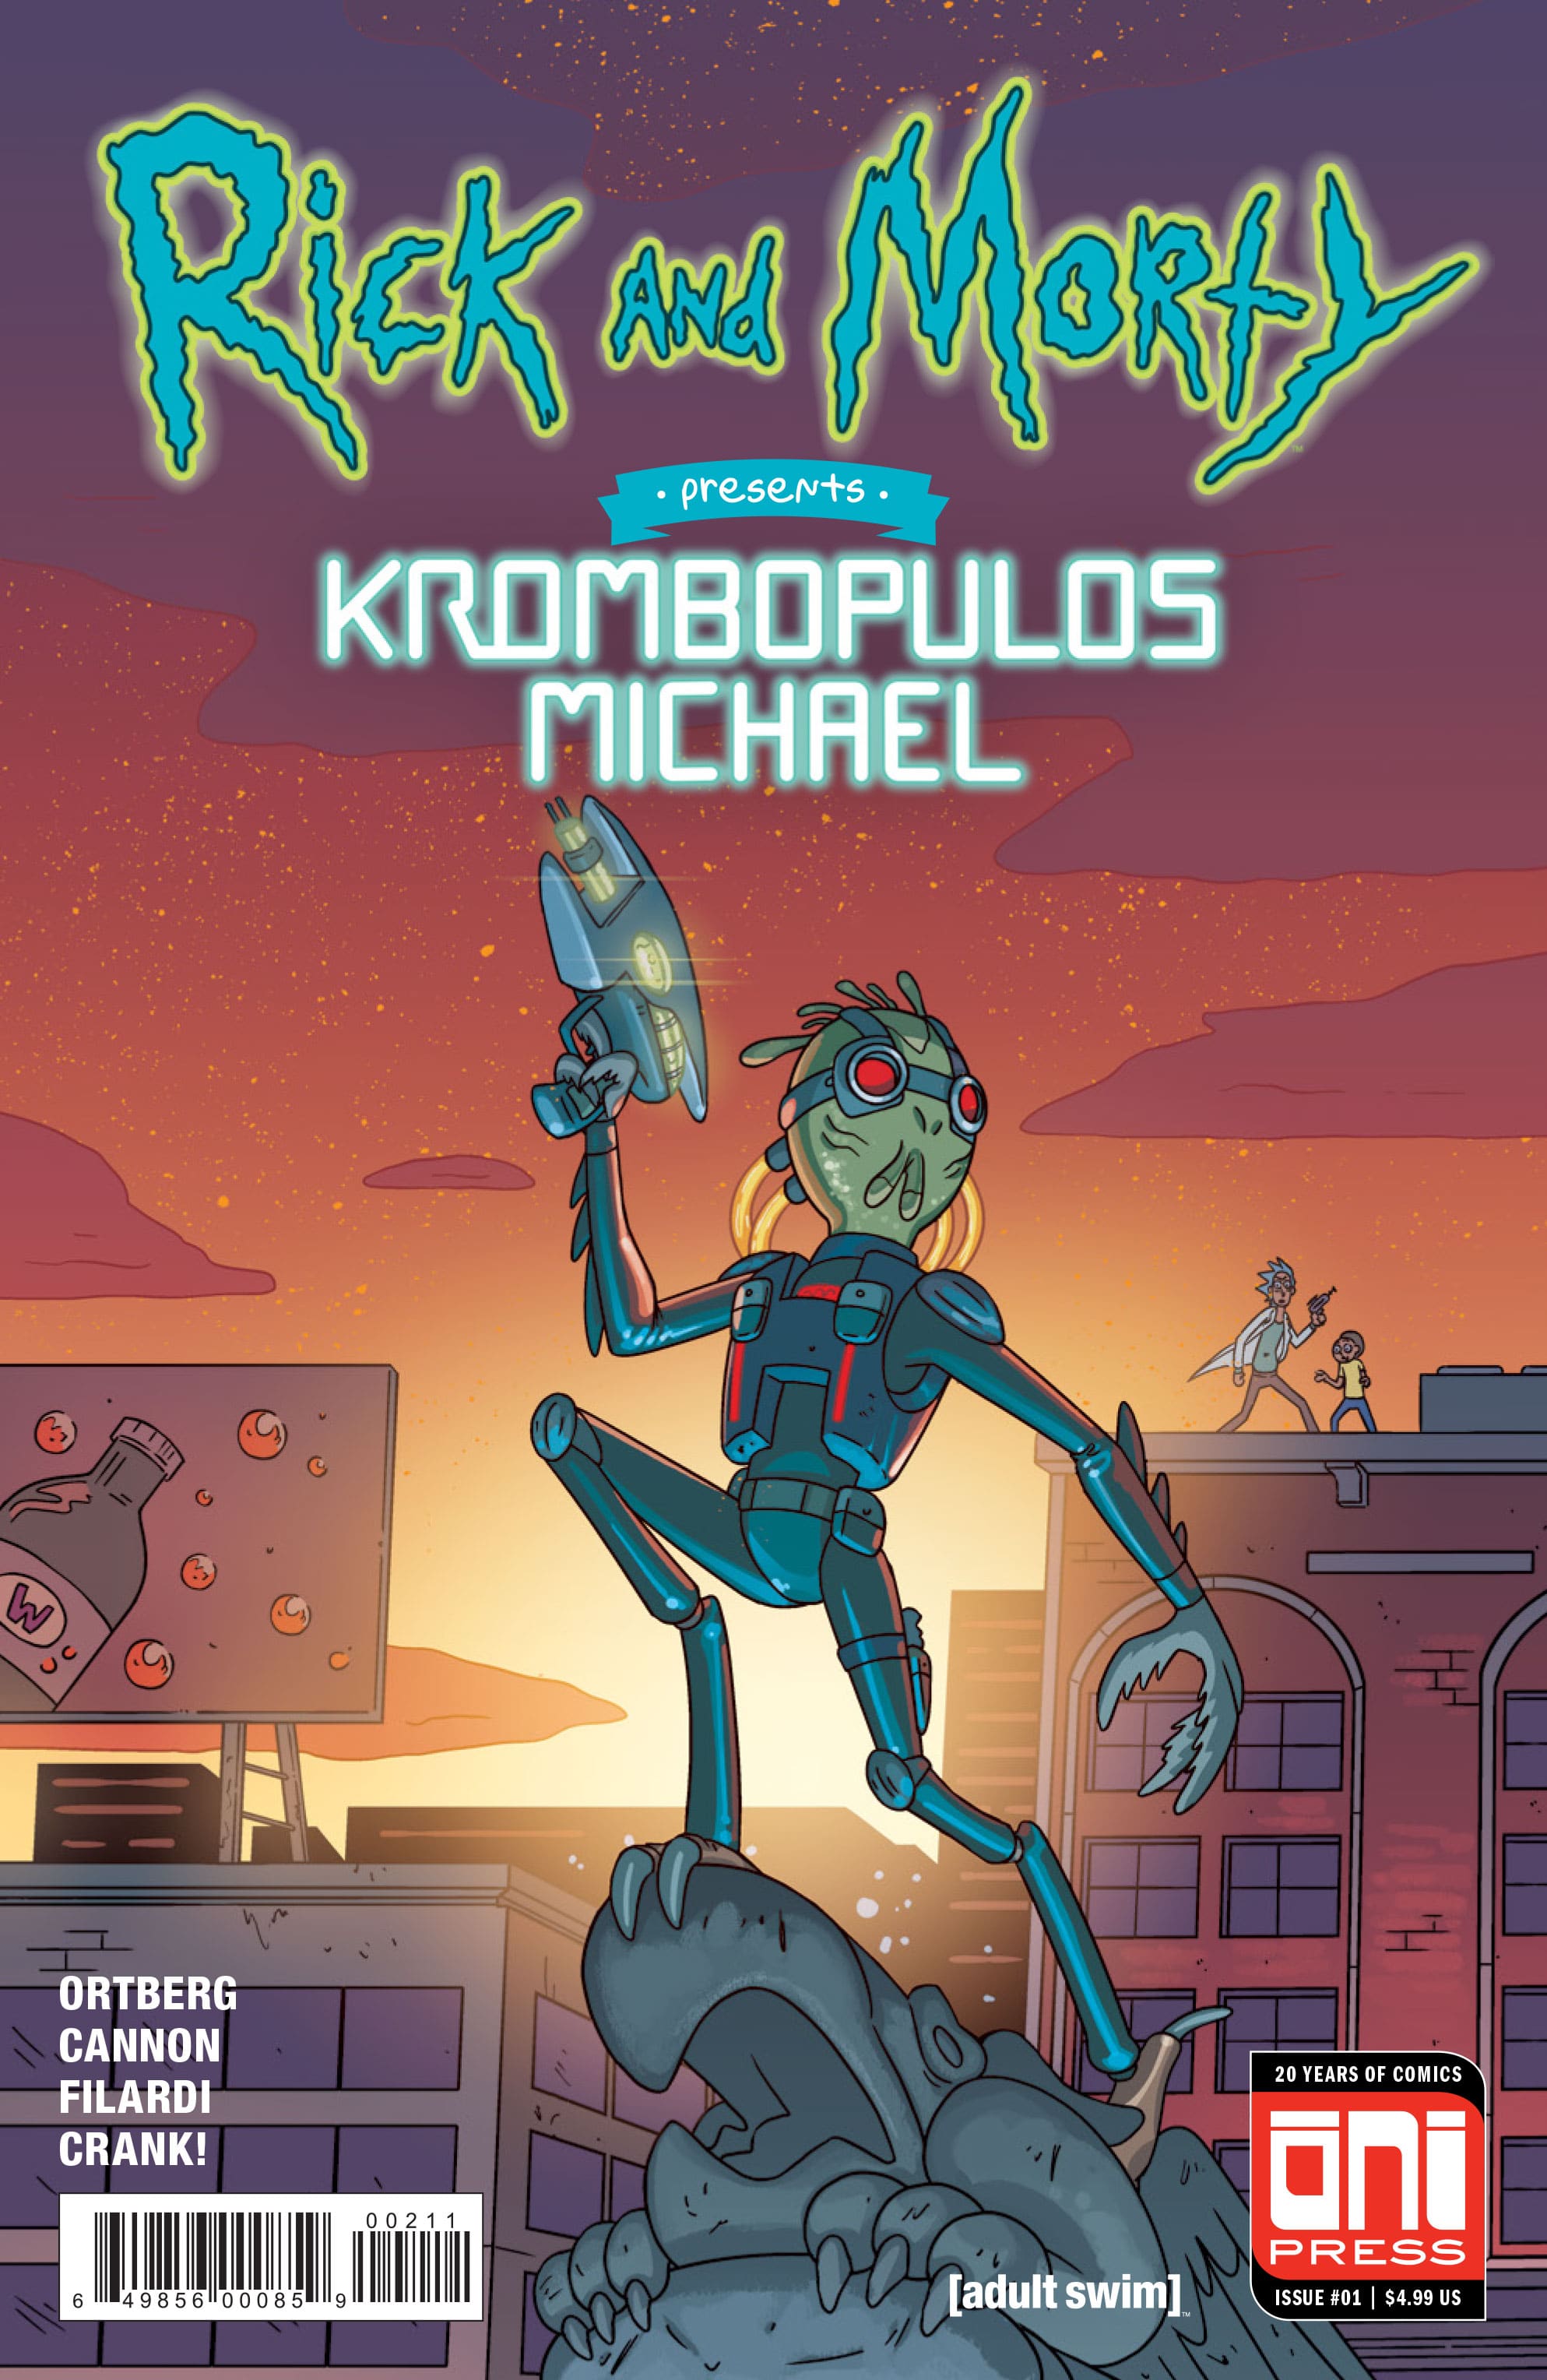 Rick and Morty Presents: Krombopulos Michael #1 Review